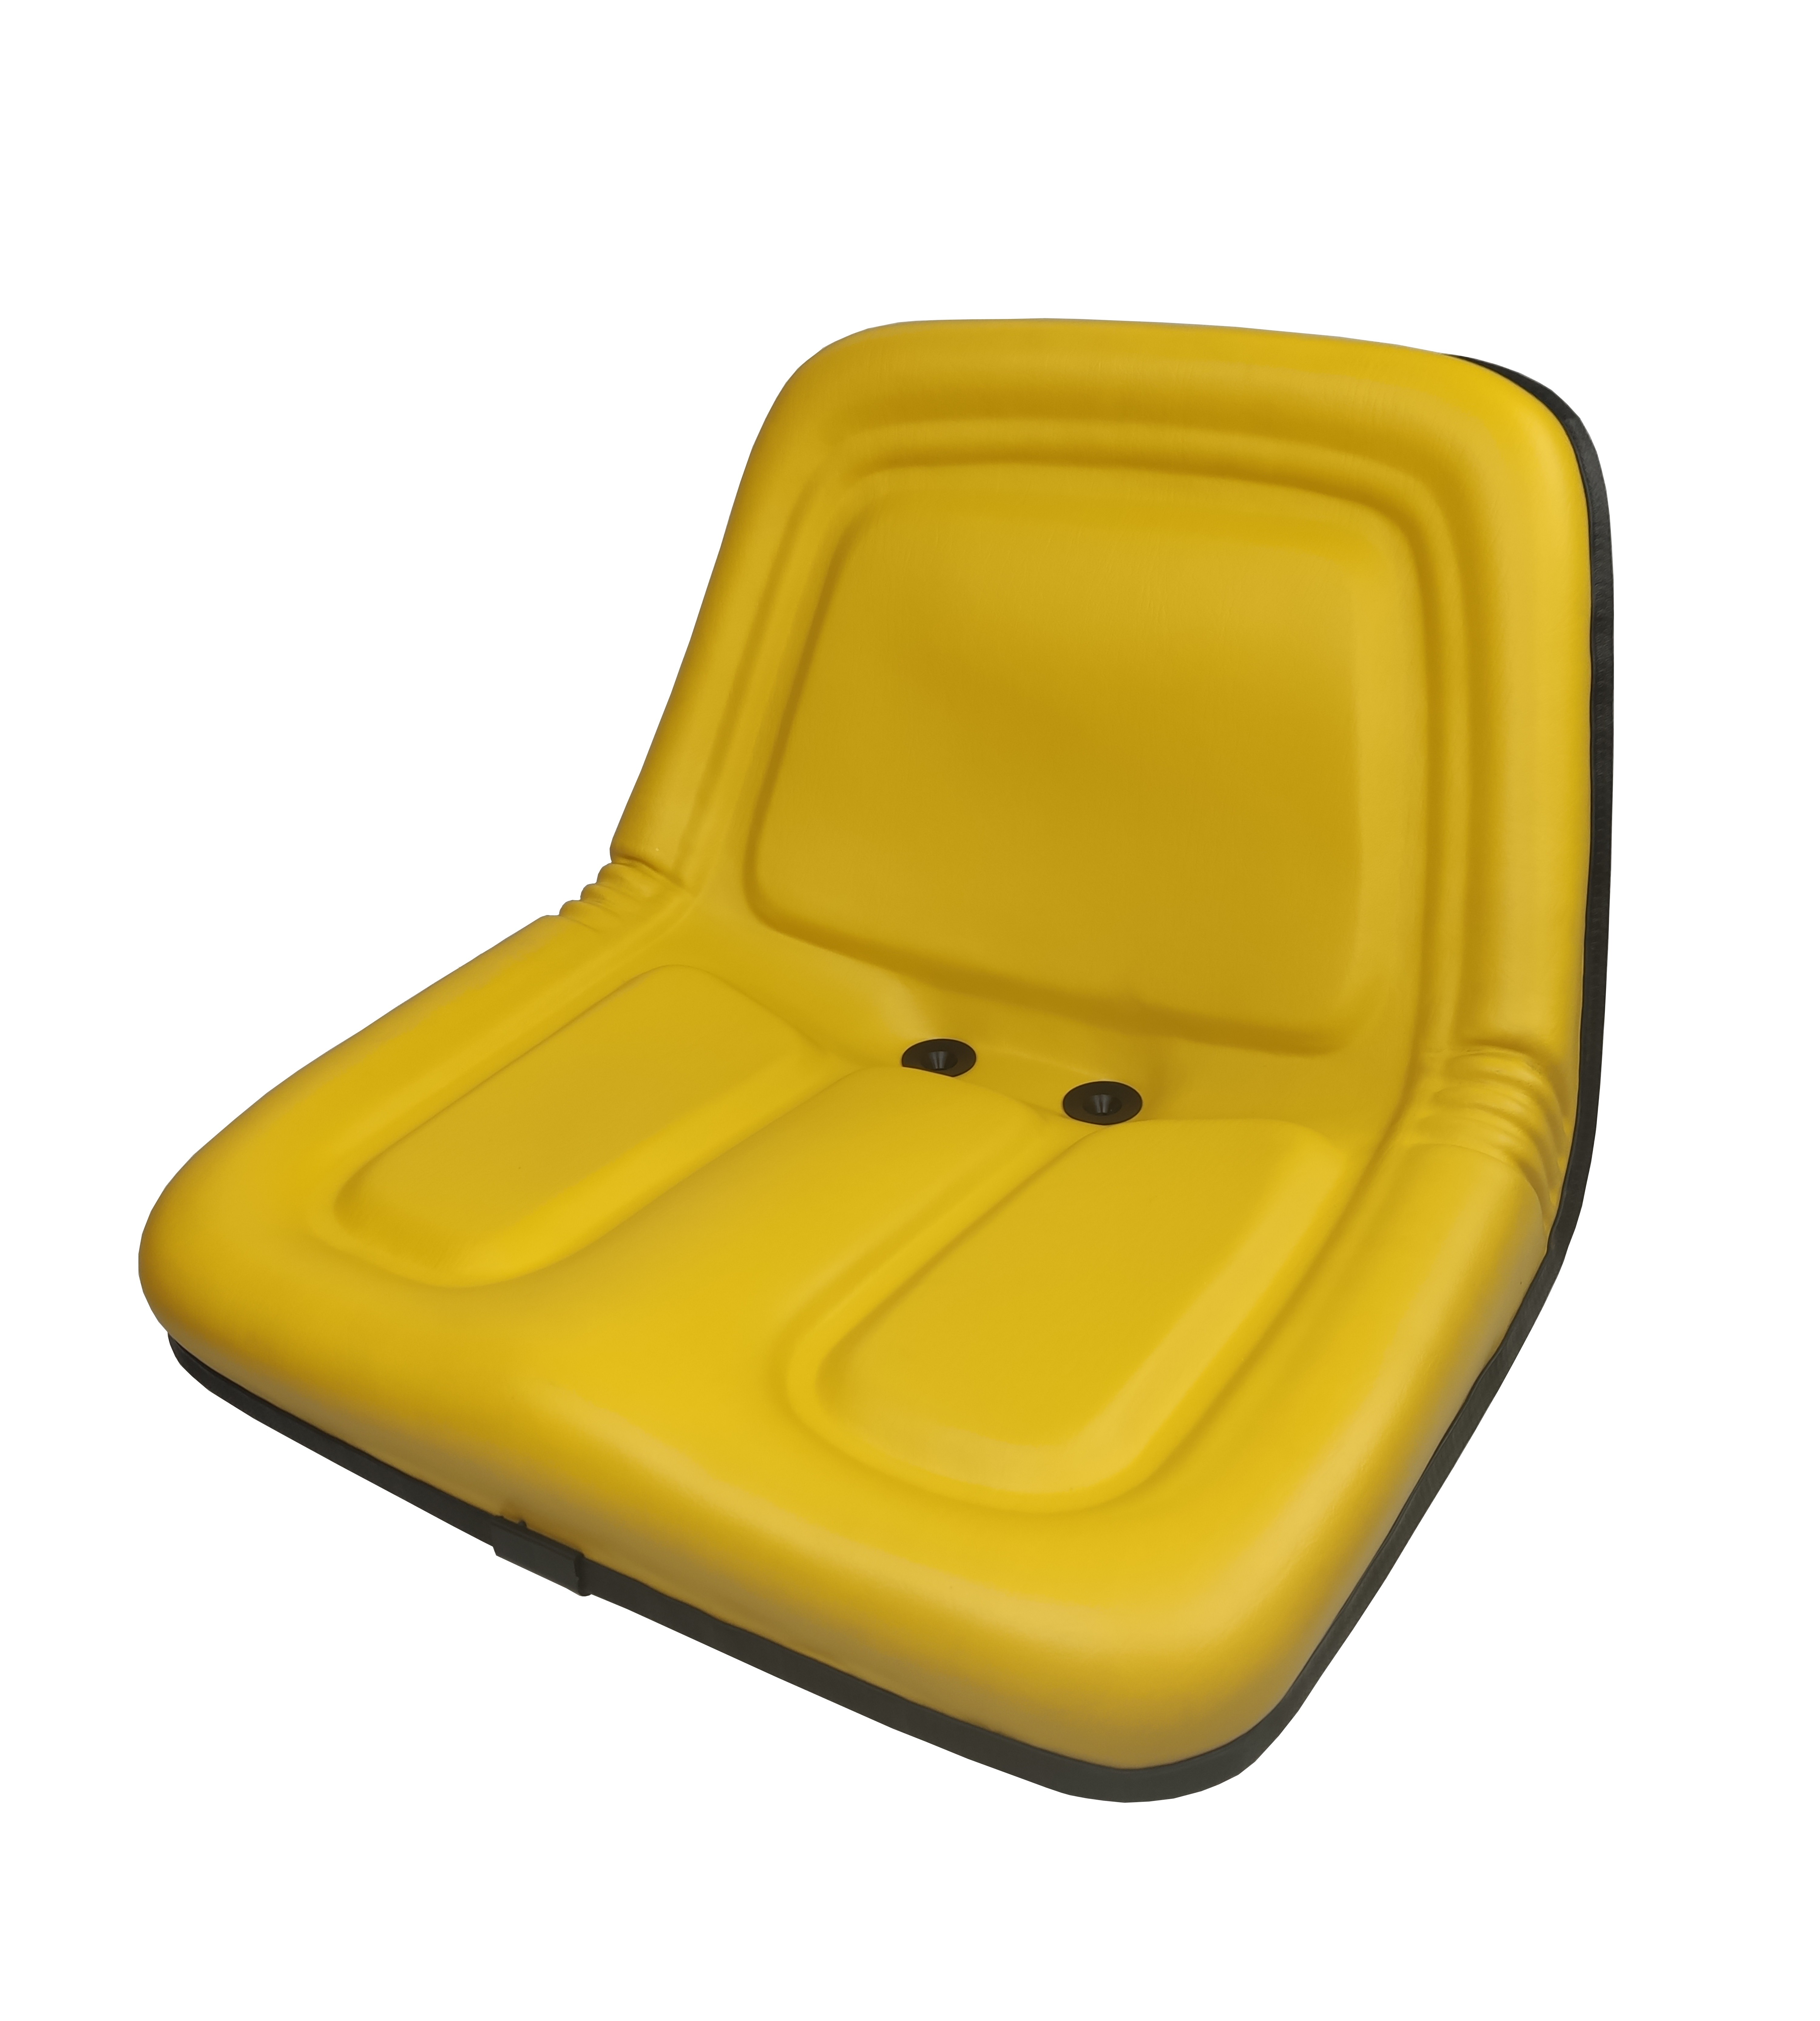 Universal Replacement Lawn Mower Seat with Water Drain Holes